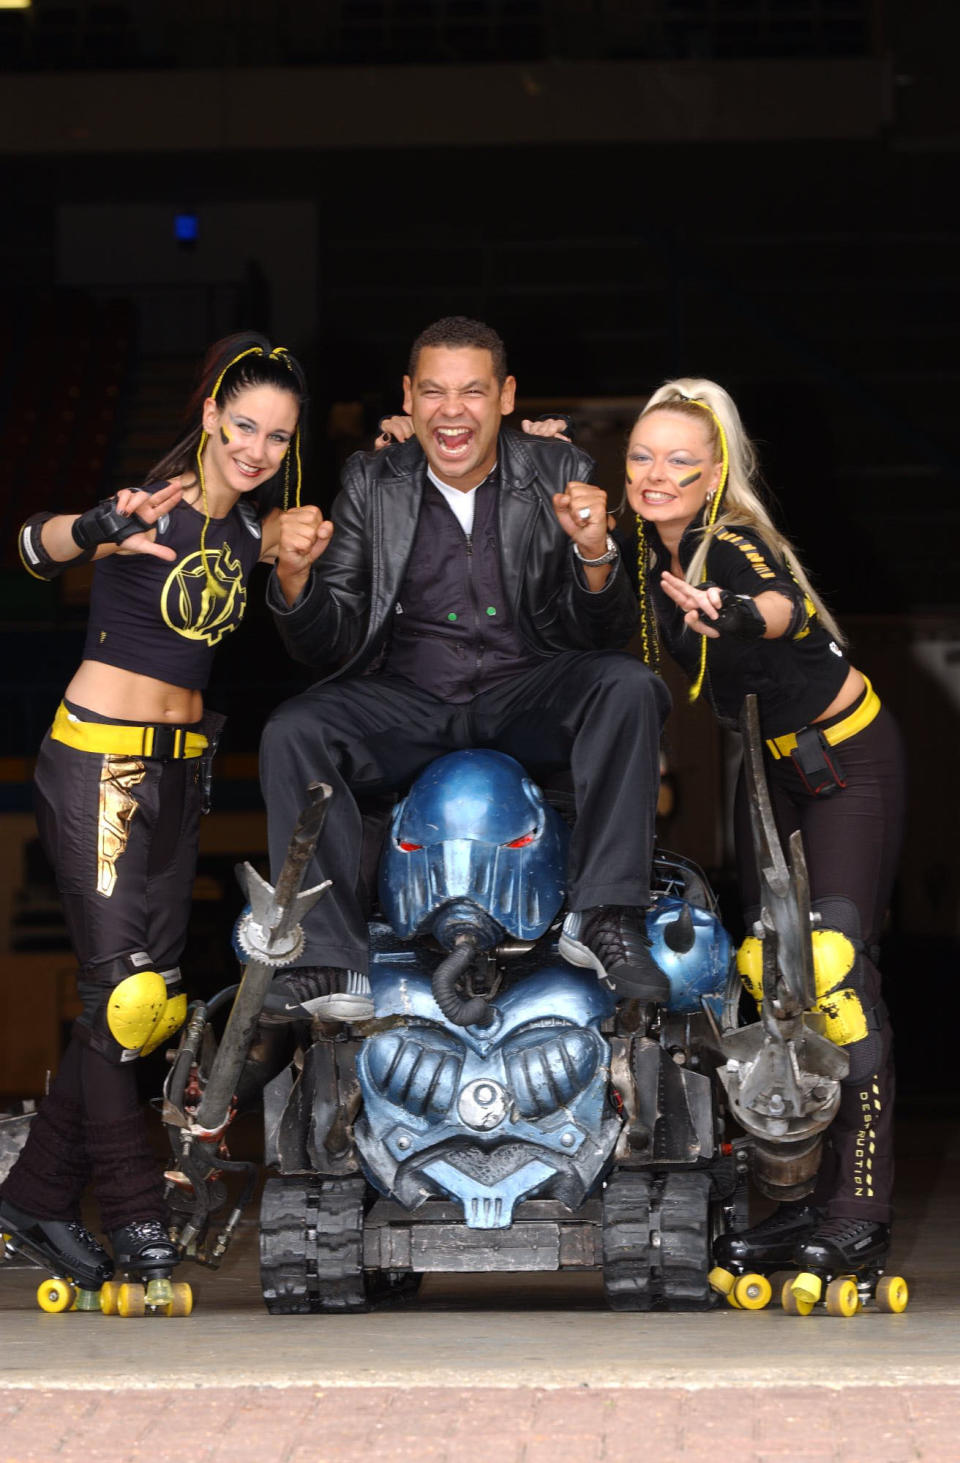 Robobabes Emily Vincent and Kelly Allen with presenter Craig Charles and the house robots promoting The Robot Wars Live Event, taking place at the London Arena and at the Wembley Arena.